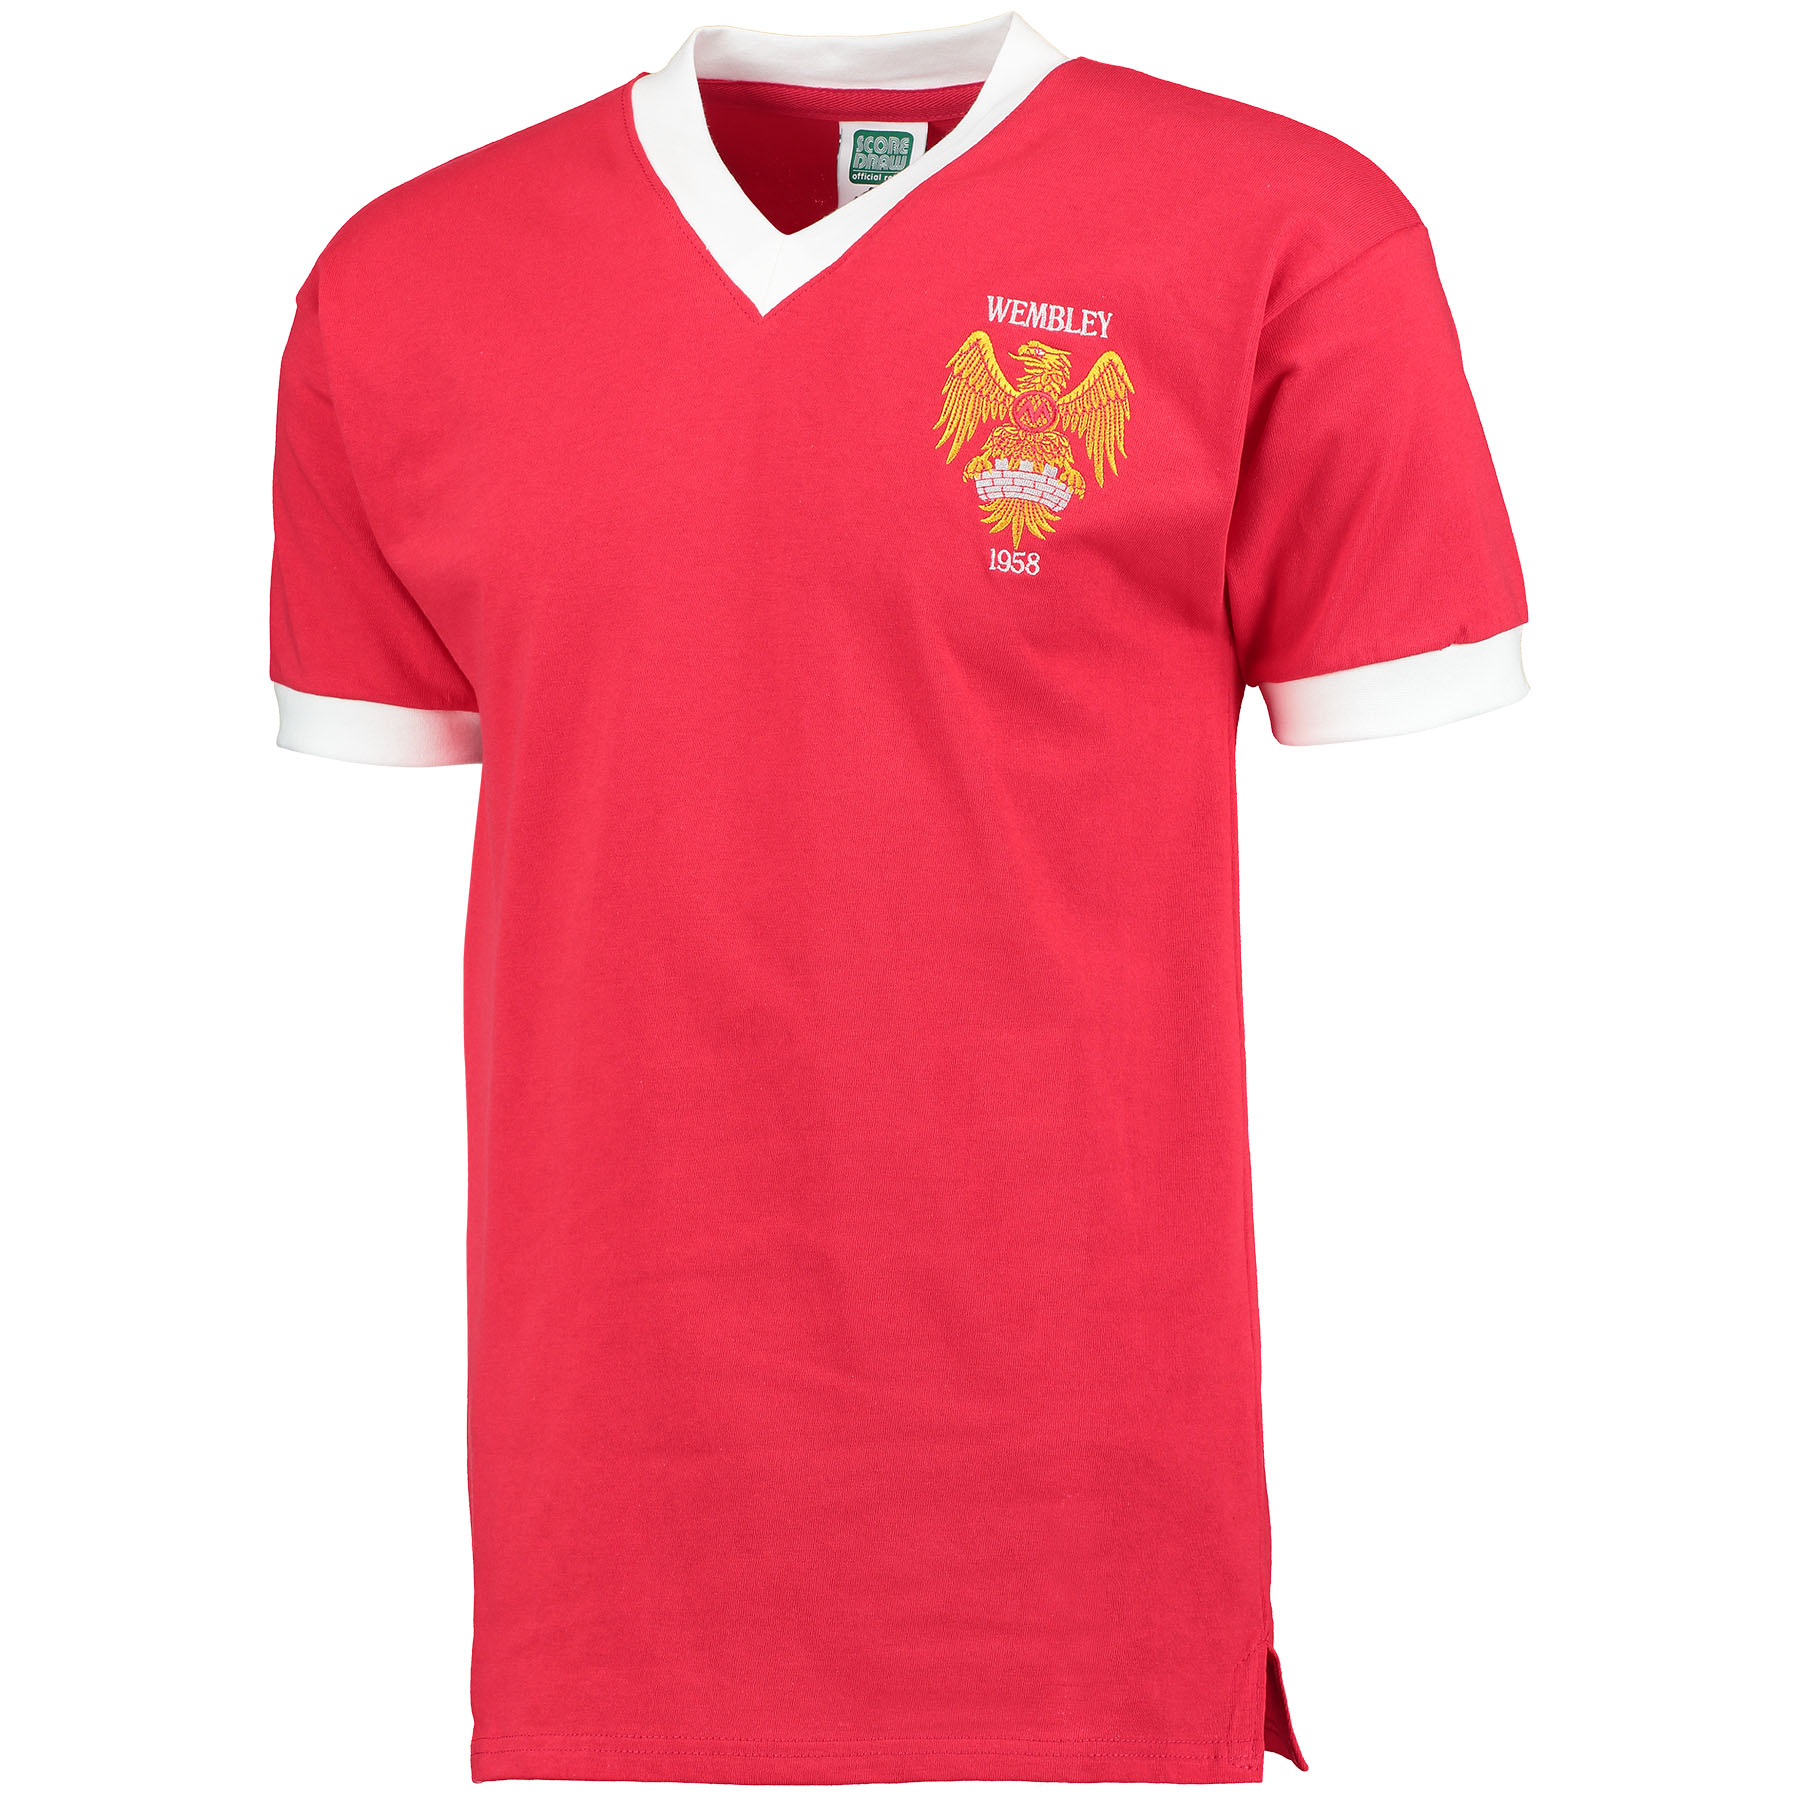 http://images.kitbag.com/mufc-60930.jpg?width=&height=&quality=95?width=400&height=400&quality=95